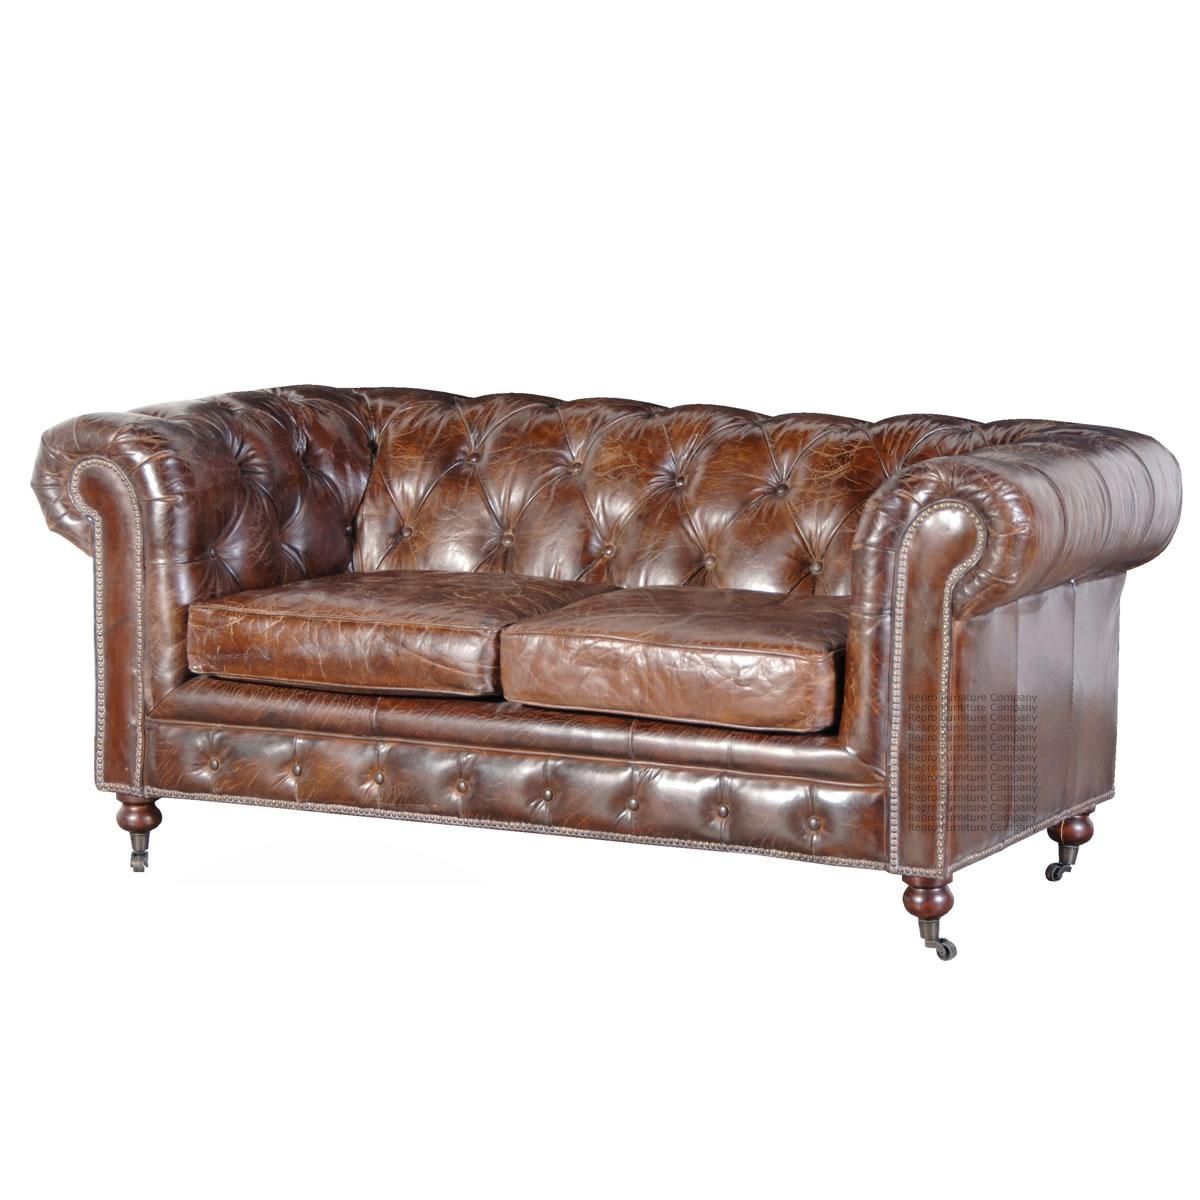 Sofas Center : Enchanting Ethan Allen Leather Sofa Craigslist With Craigslist Chesterfield Sofas (View 17 of 20)